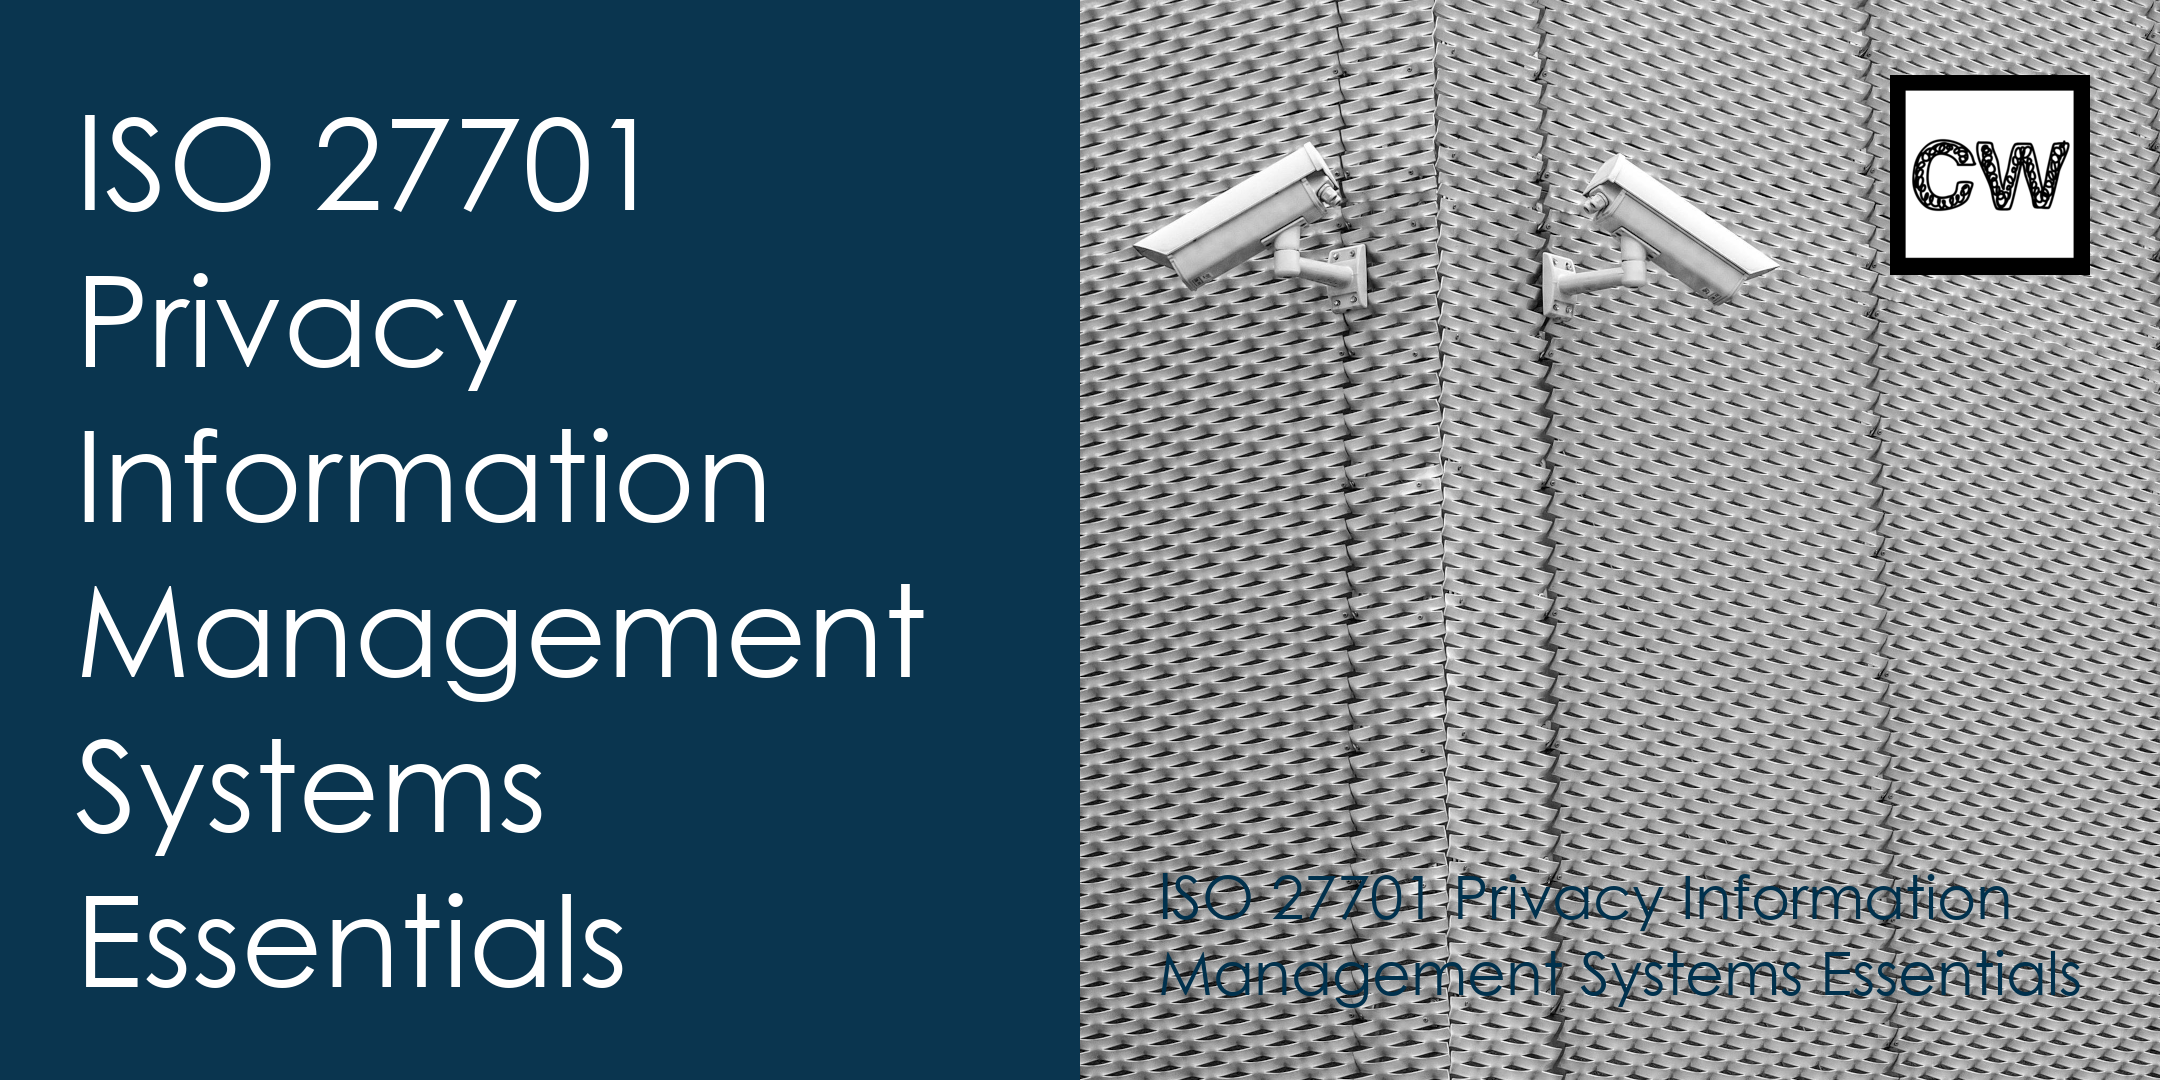 ISO 27701 Privacy Information Management Systems-Essentials